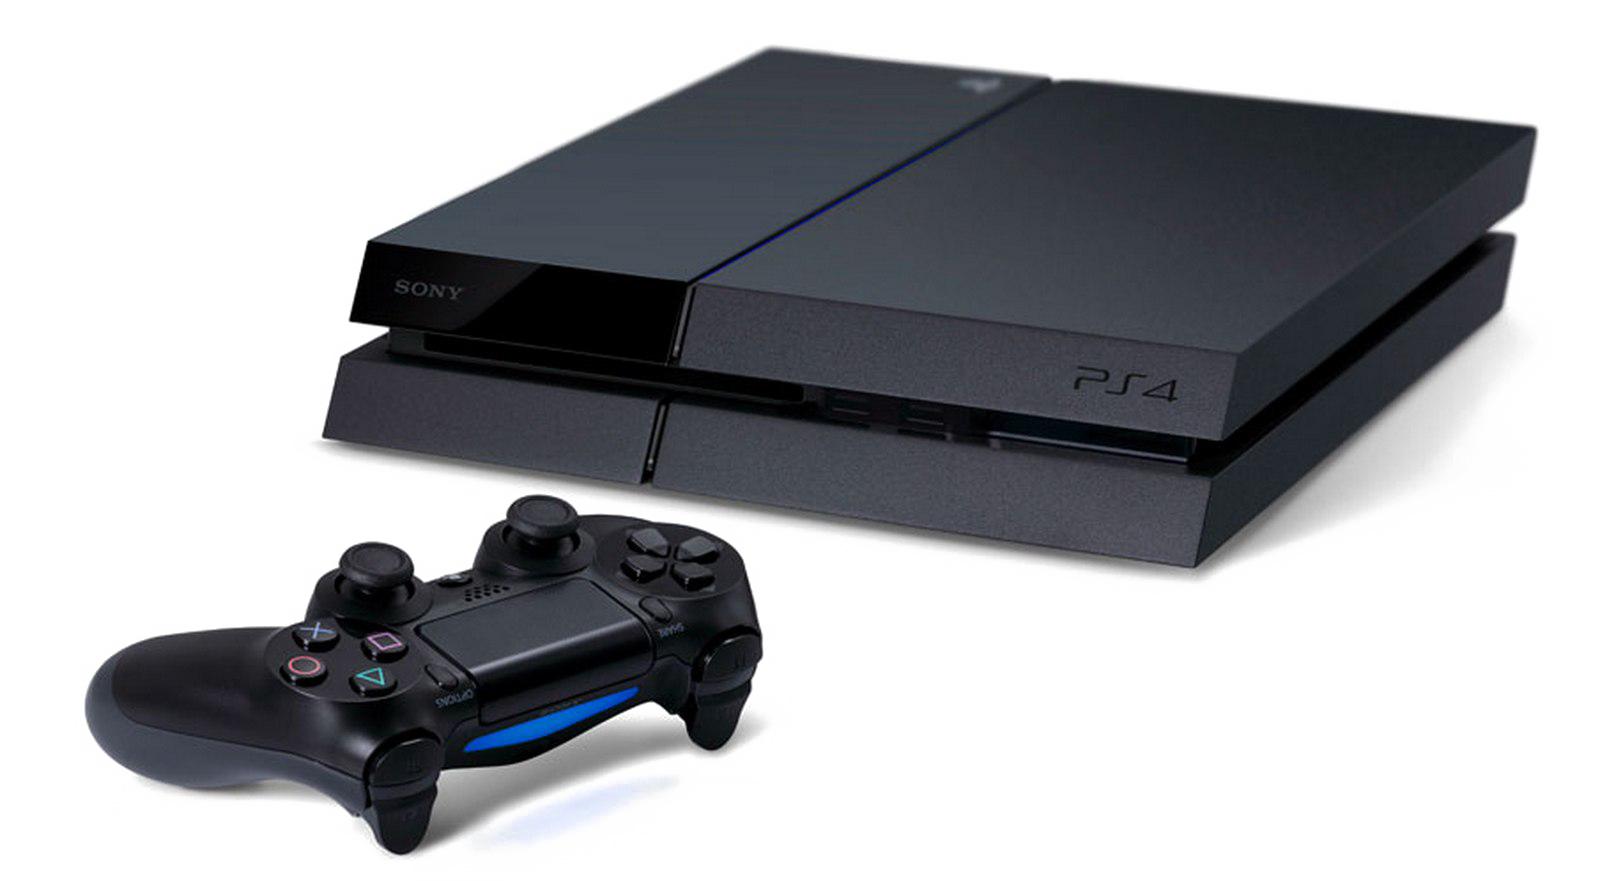 Sony Playstation 4 PS4 | Day 1 UK launch console | Flickr